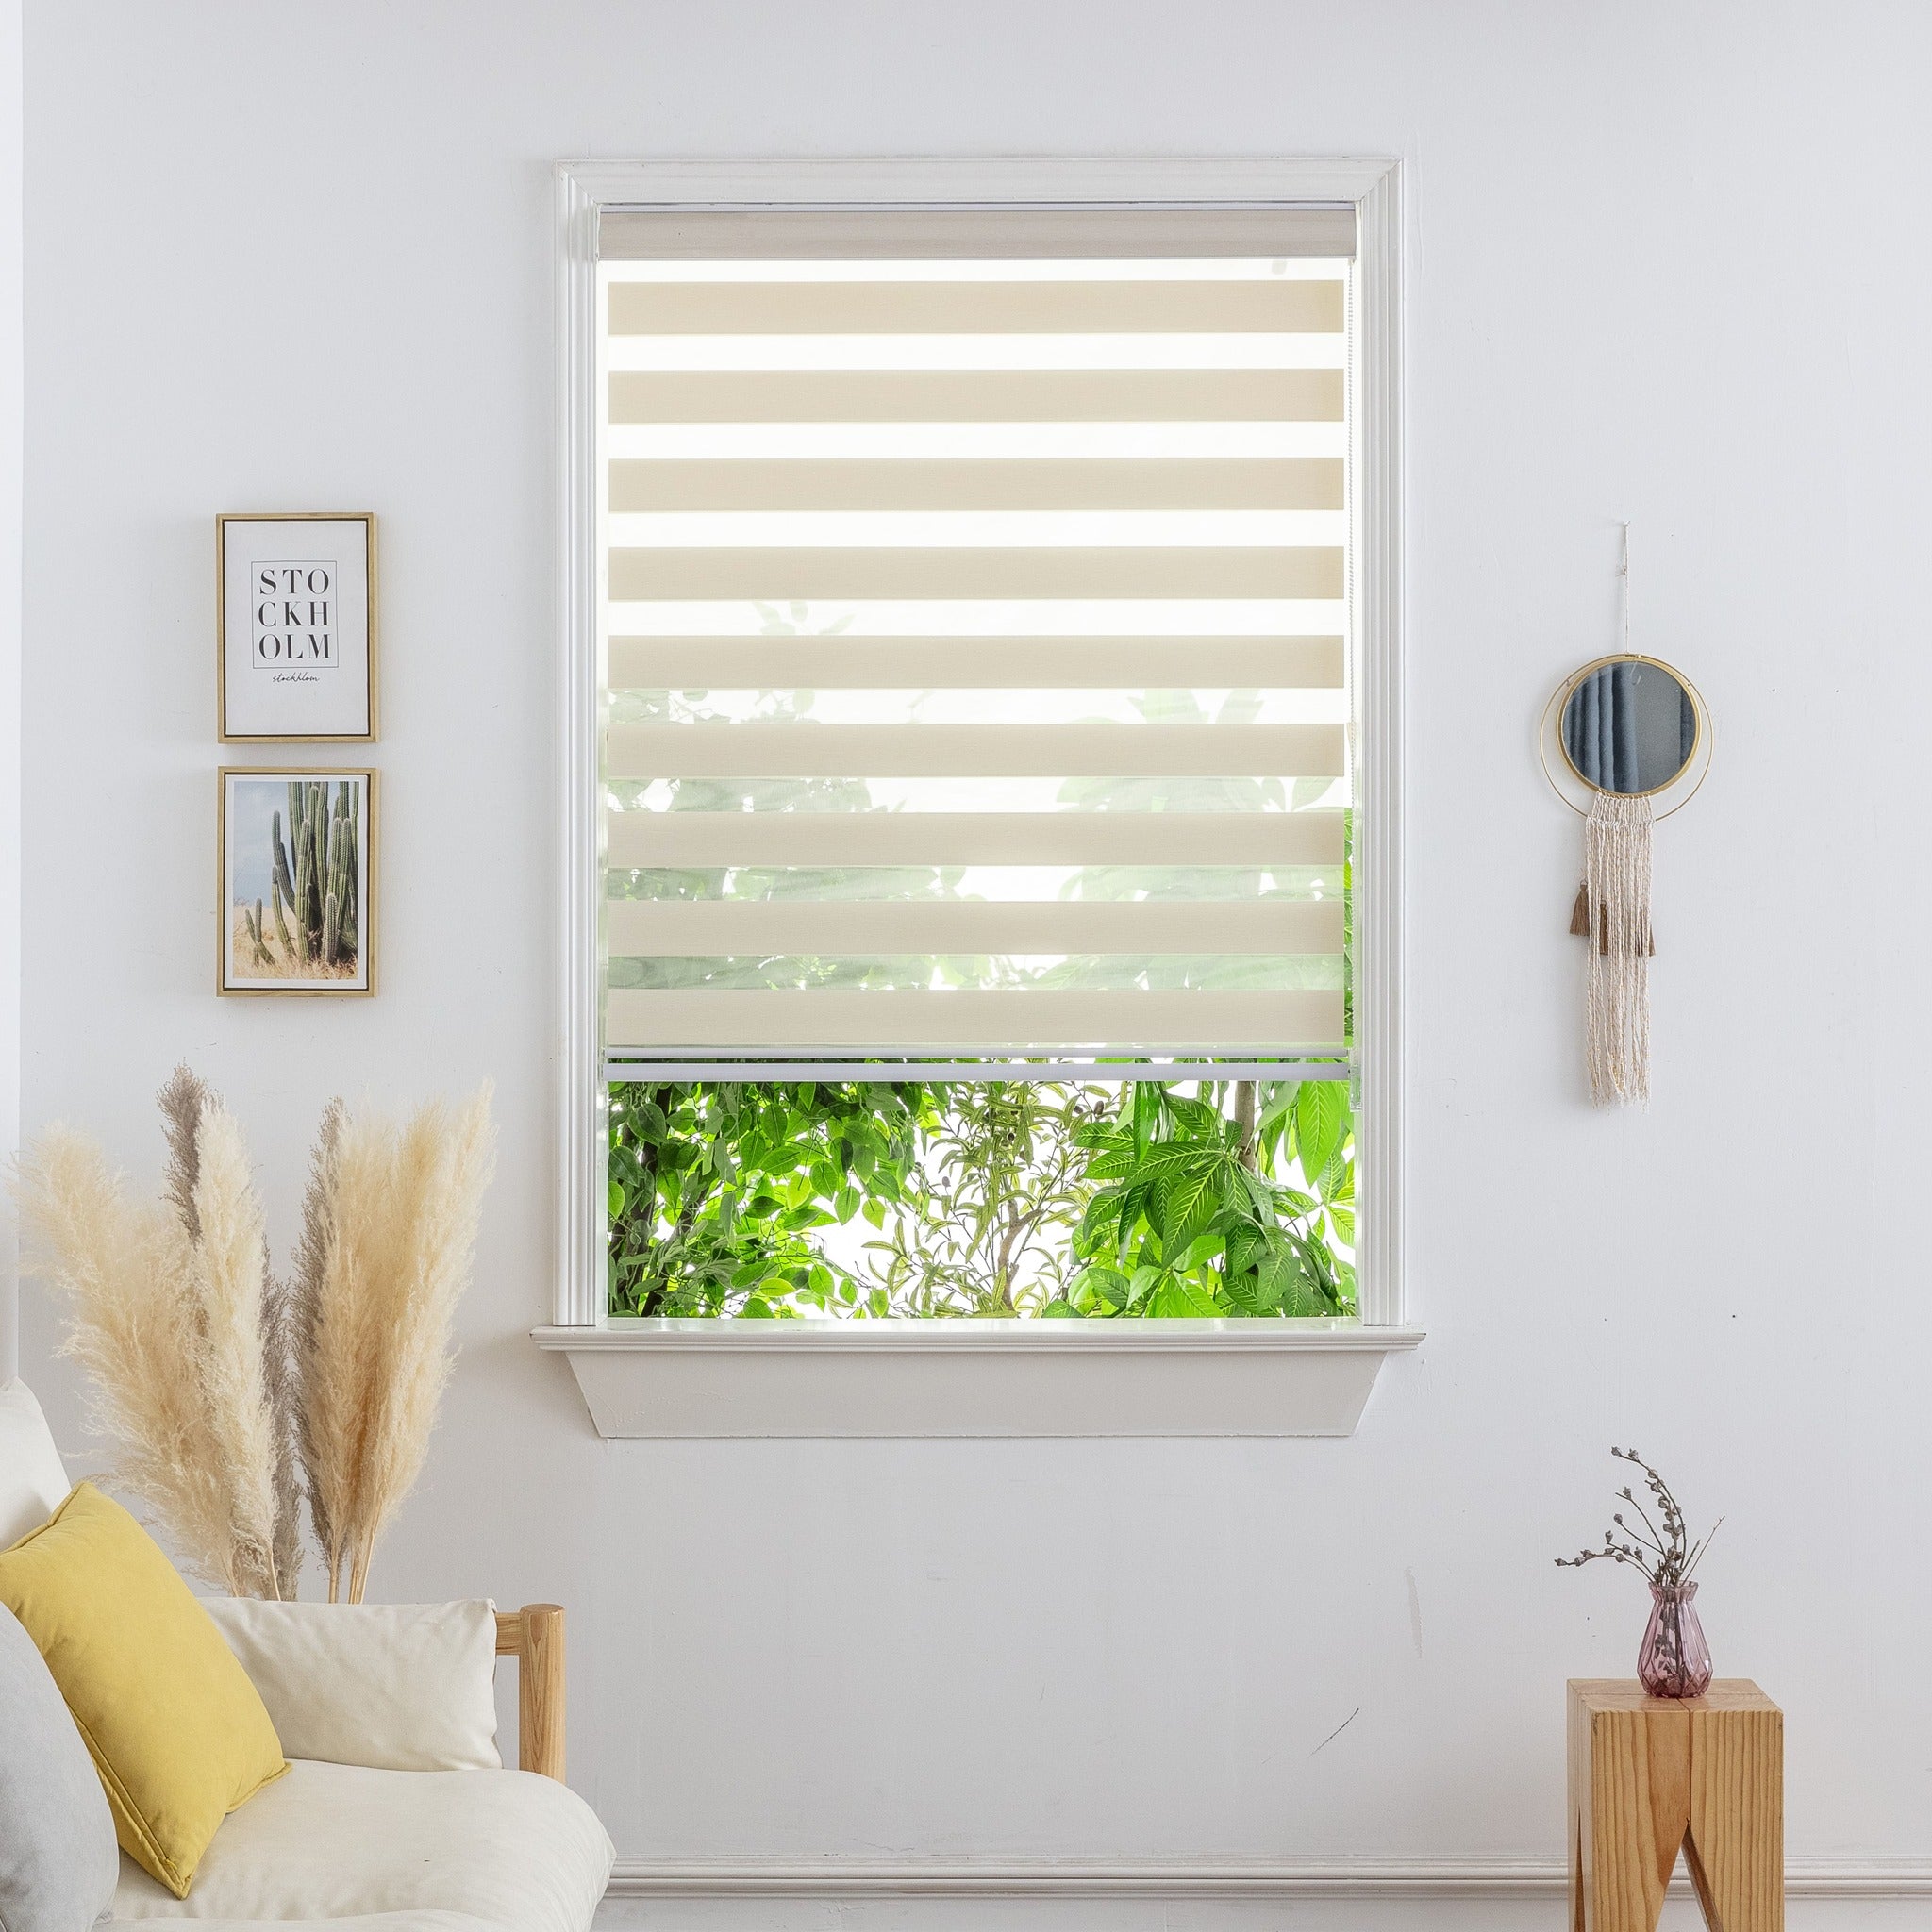 S3-001 Light Filtering Zebra Blind Dual Shade - Water Proof